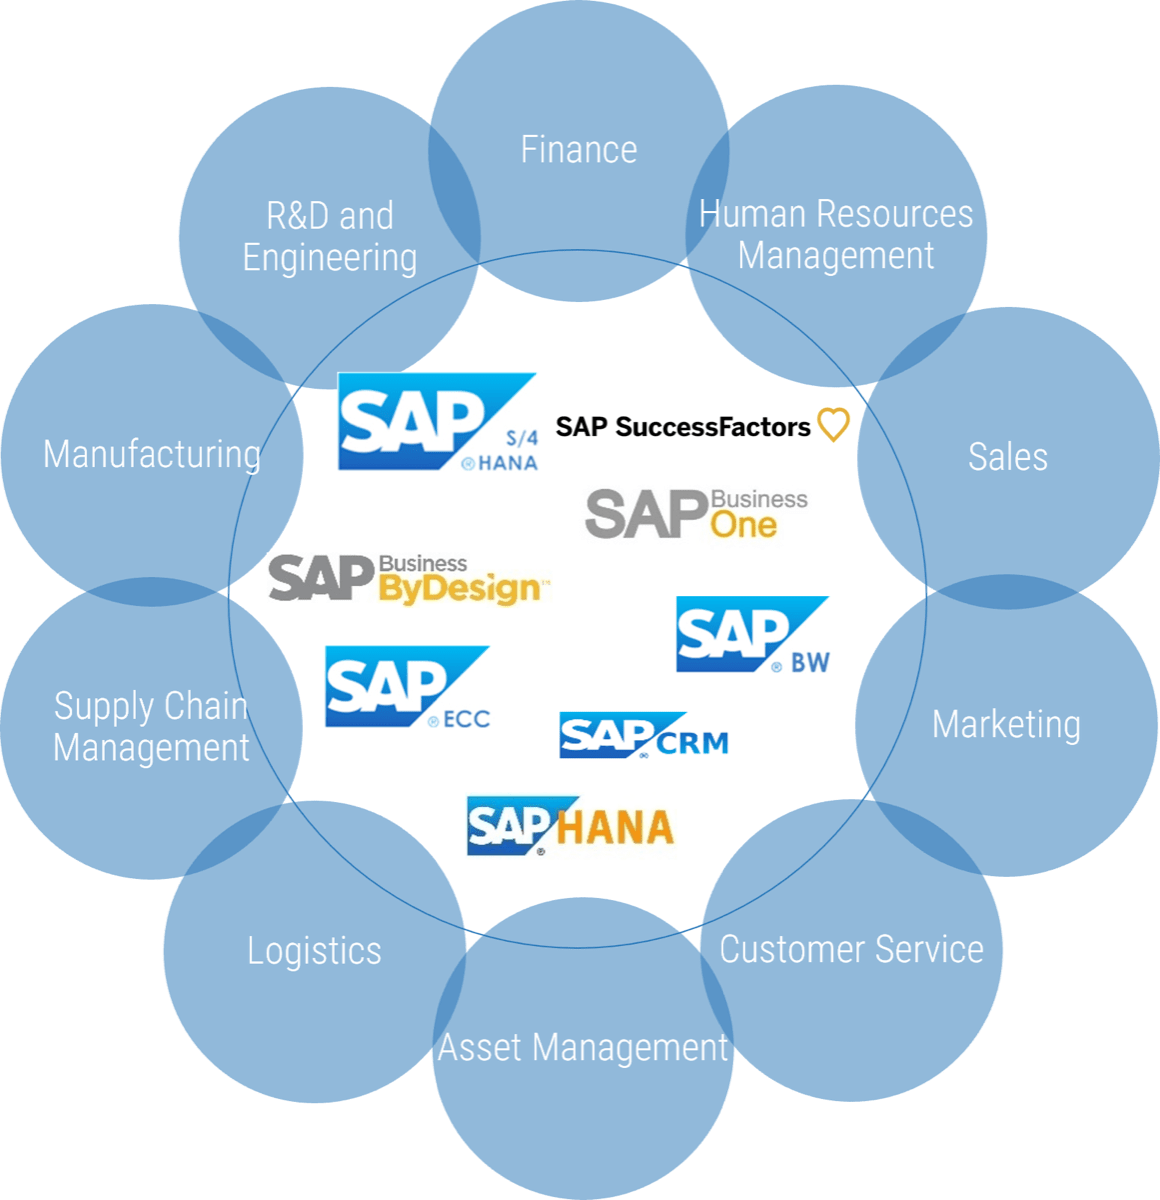 The image contains a diagram of the SAP enterprise resource planning. The diagram includes a circle with smaller circles all around it. The inside of the circle contains SAP logos. The circles around the big circle are labelled: Human Resources Management, Sales, Marketing, Customer Service, Asset Management, Logistics, Supply Chain Management, Manufacturing, R&D and Engineering, and Finance.